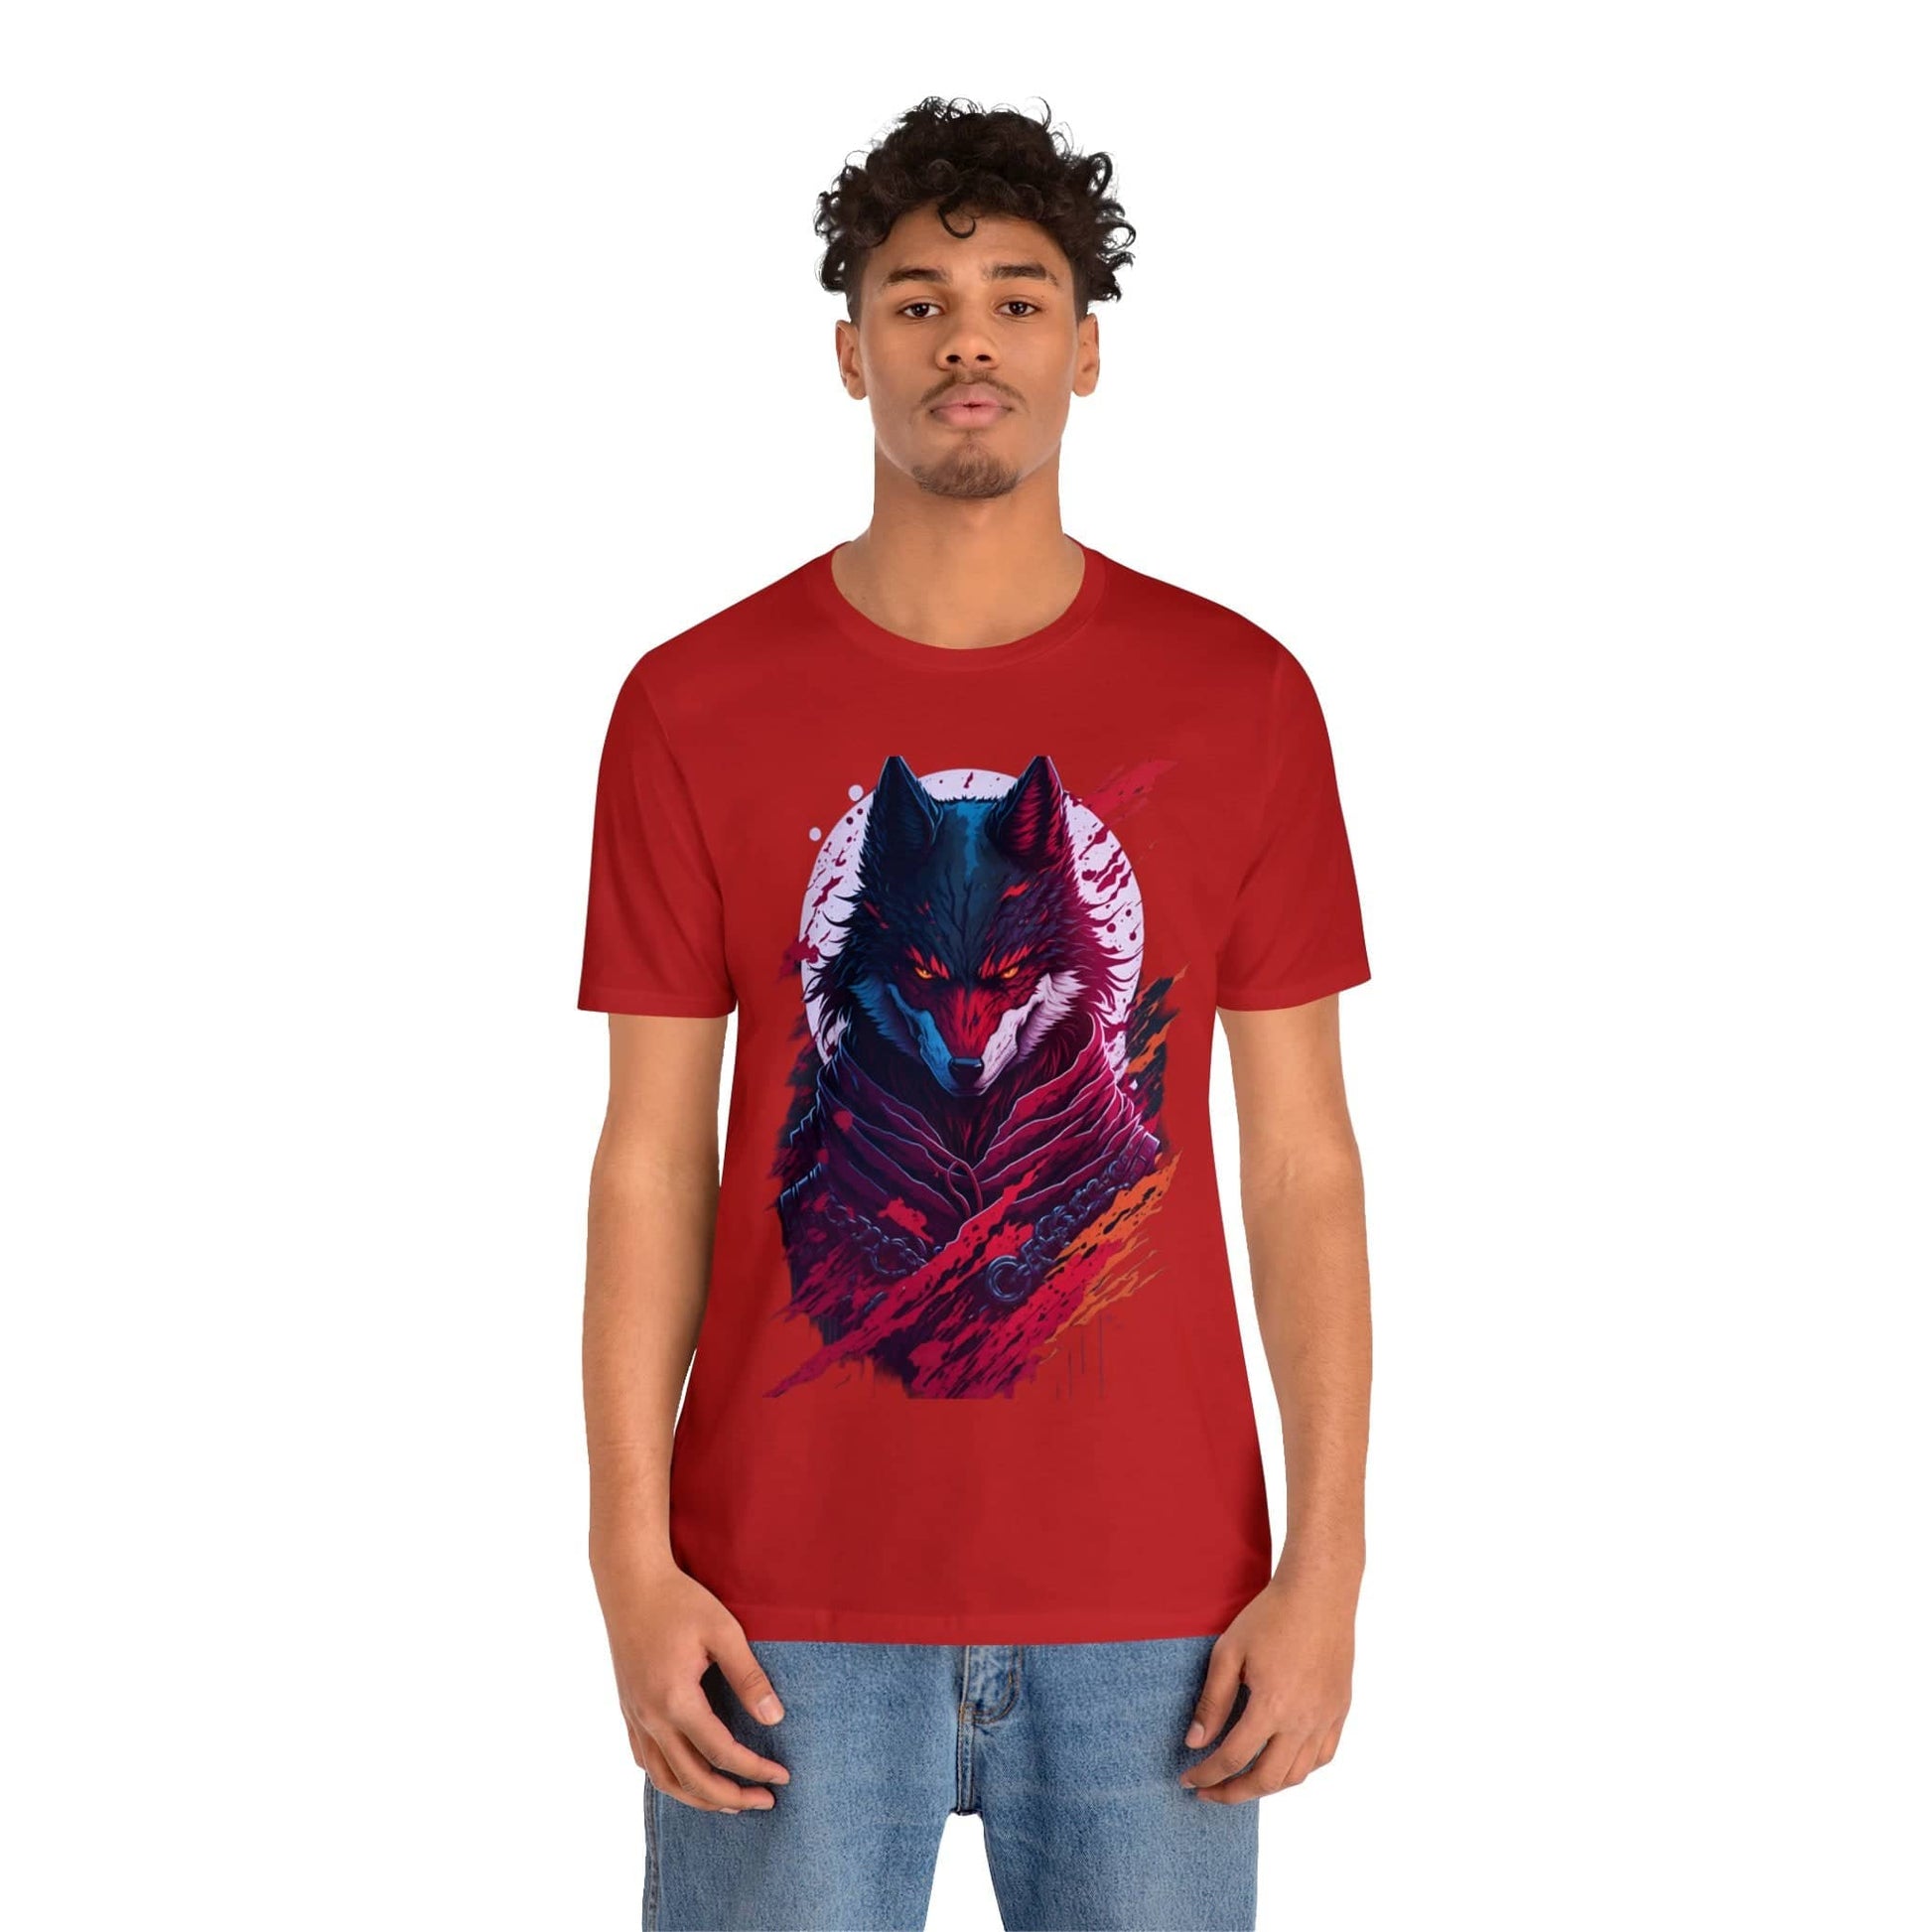 "Alex Hart: Unique T-Shirt Designs, American Design, Express Style Boldly, Fashion Trends, Personal Style, Exclusive Offers" T-Shirt Bigger Than Life Red S 